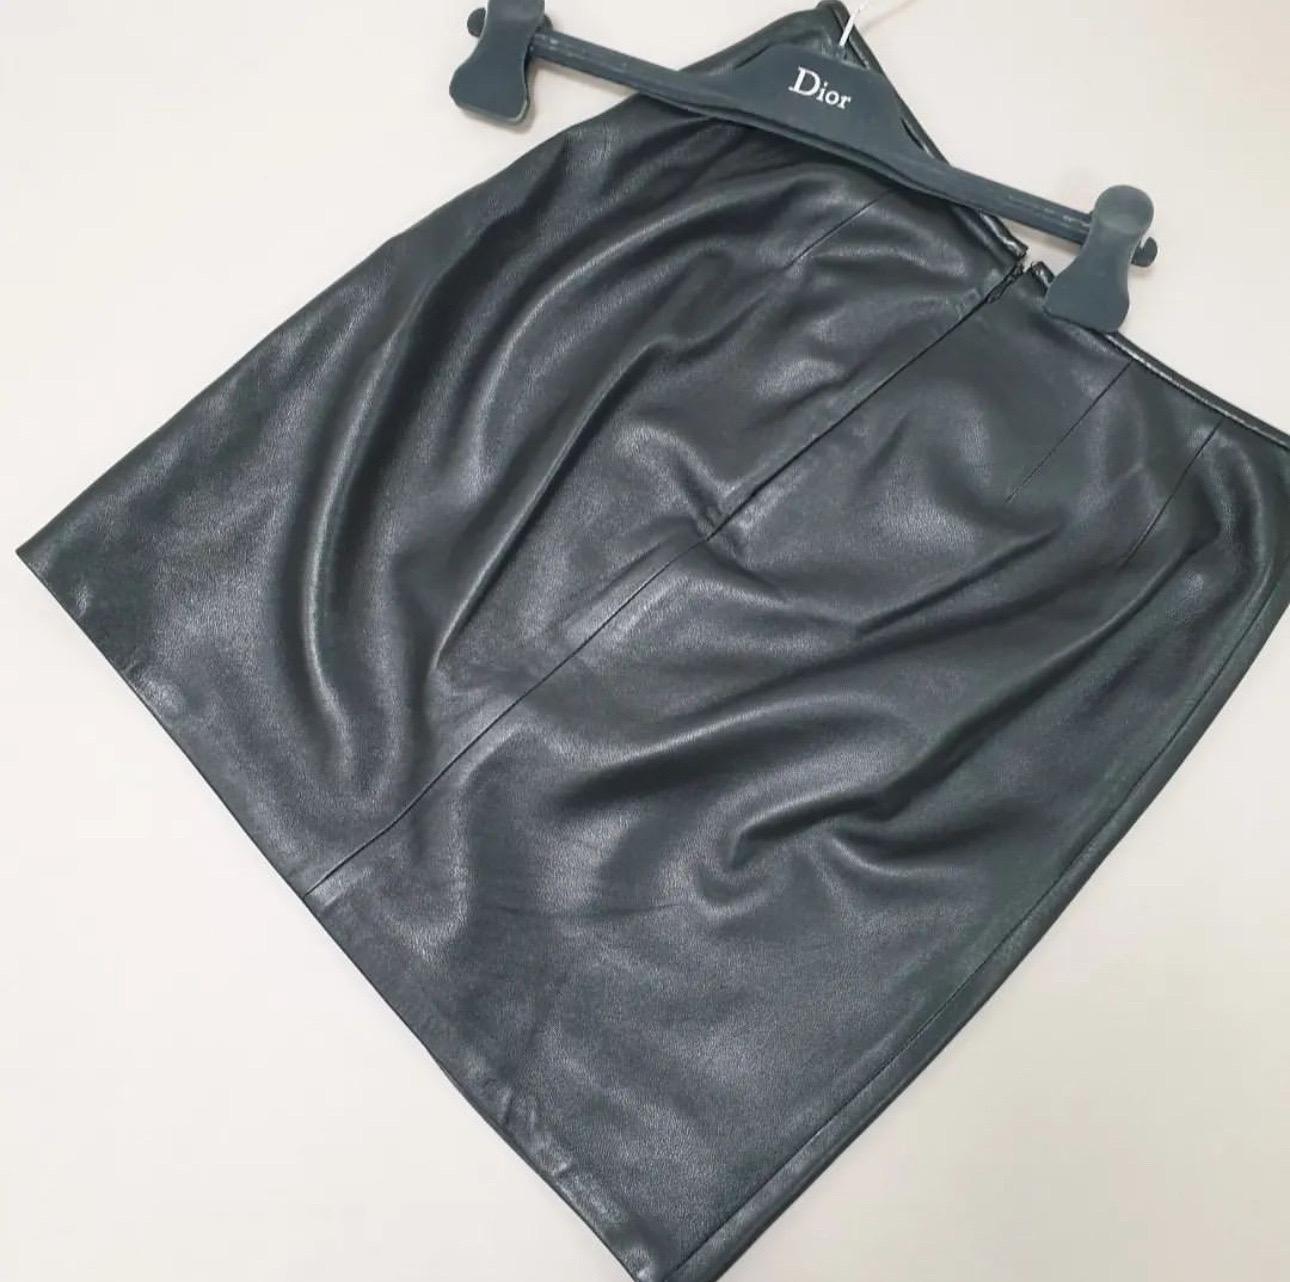 Dior Black Leather Mini Skirt In Good Condition For Sale In Krakow, PL